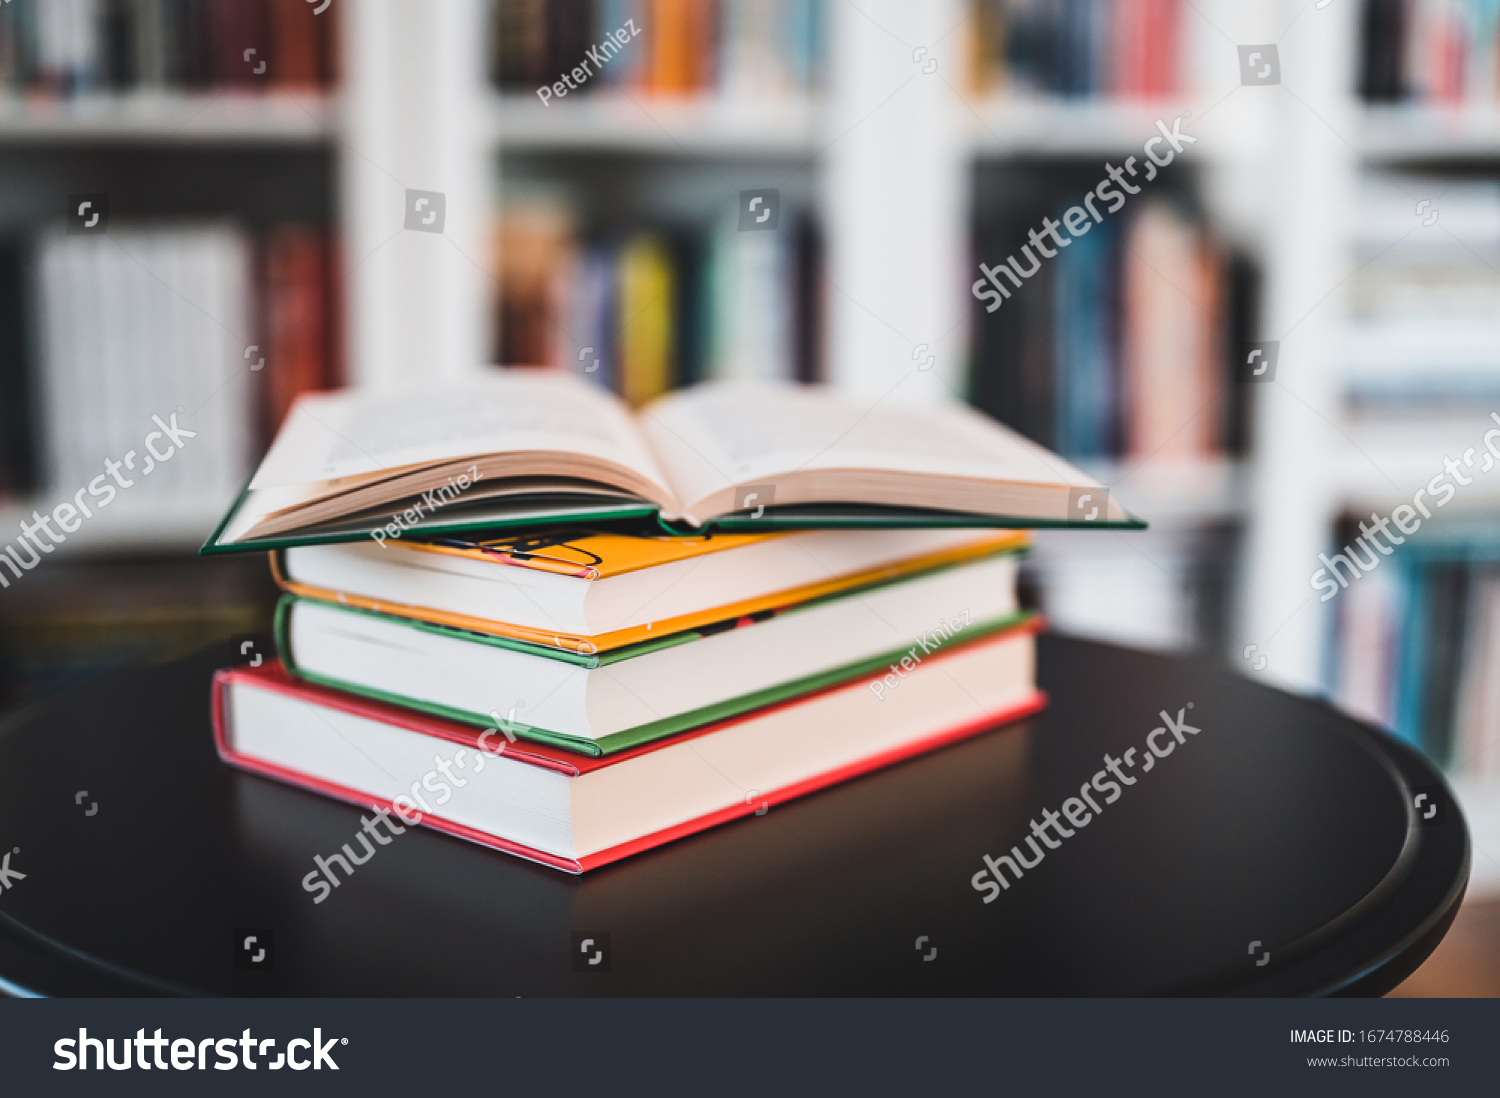 A stack of books on a black table. Library in the background. Stack of books close up. #1674788446